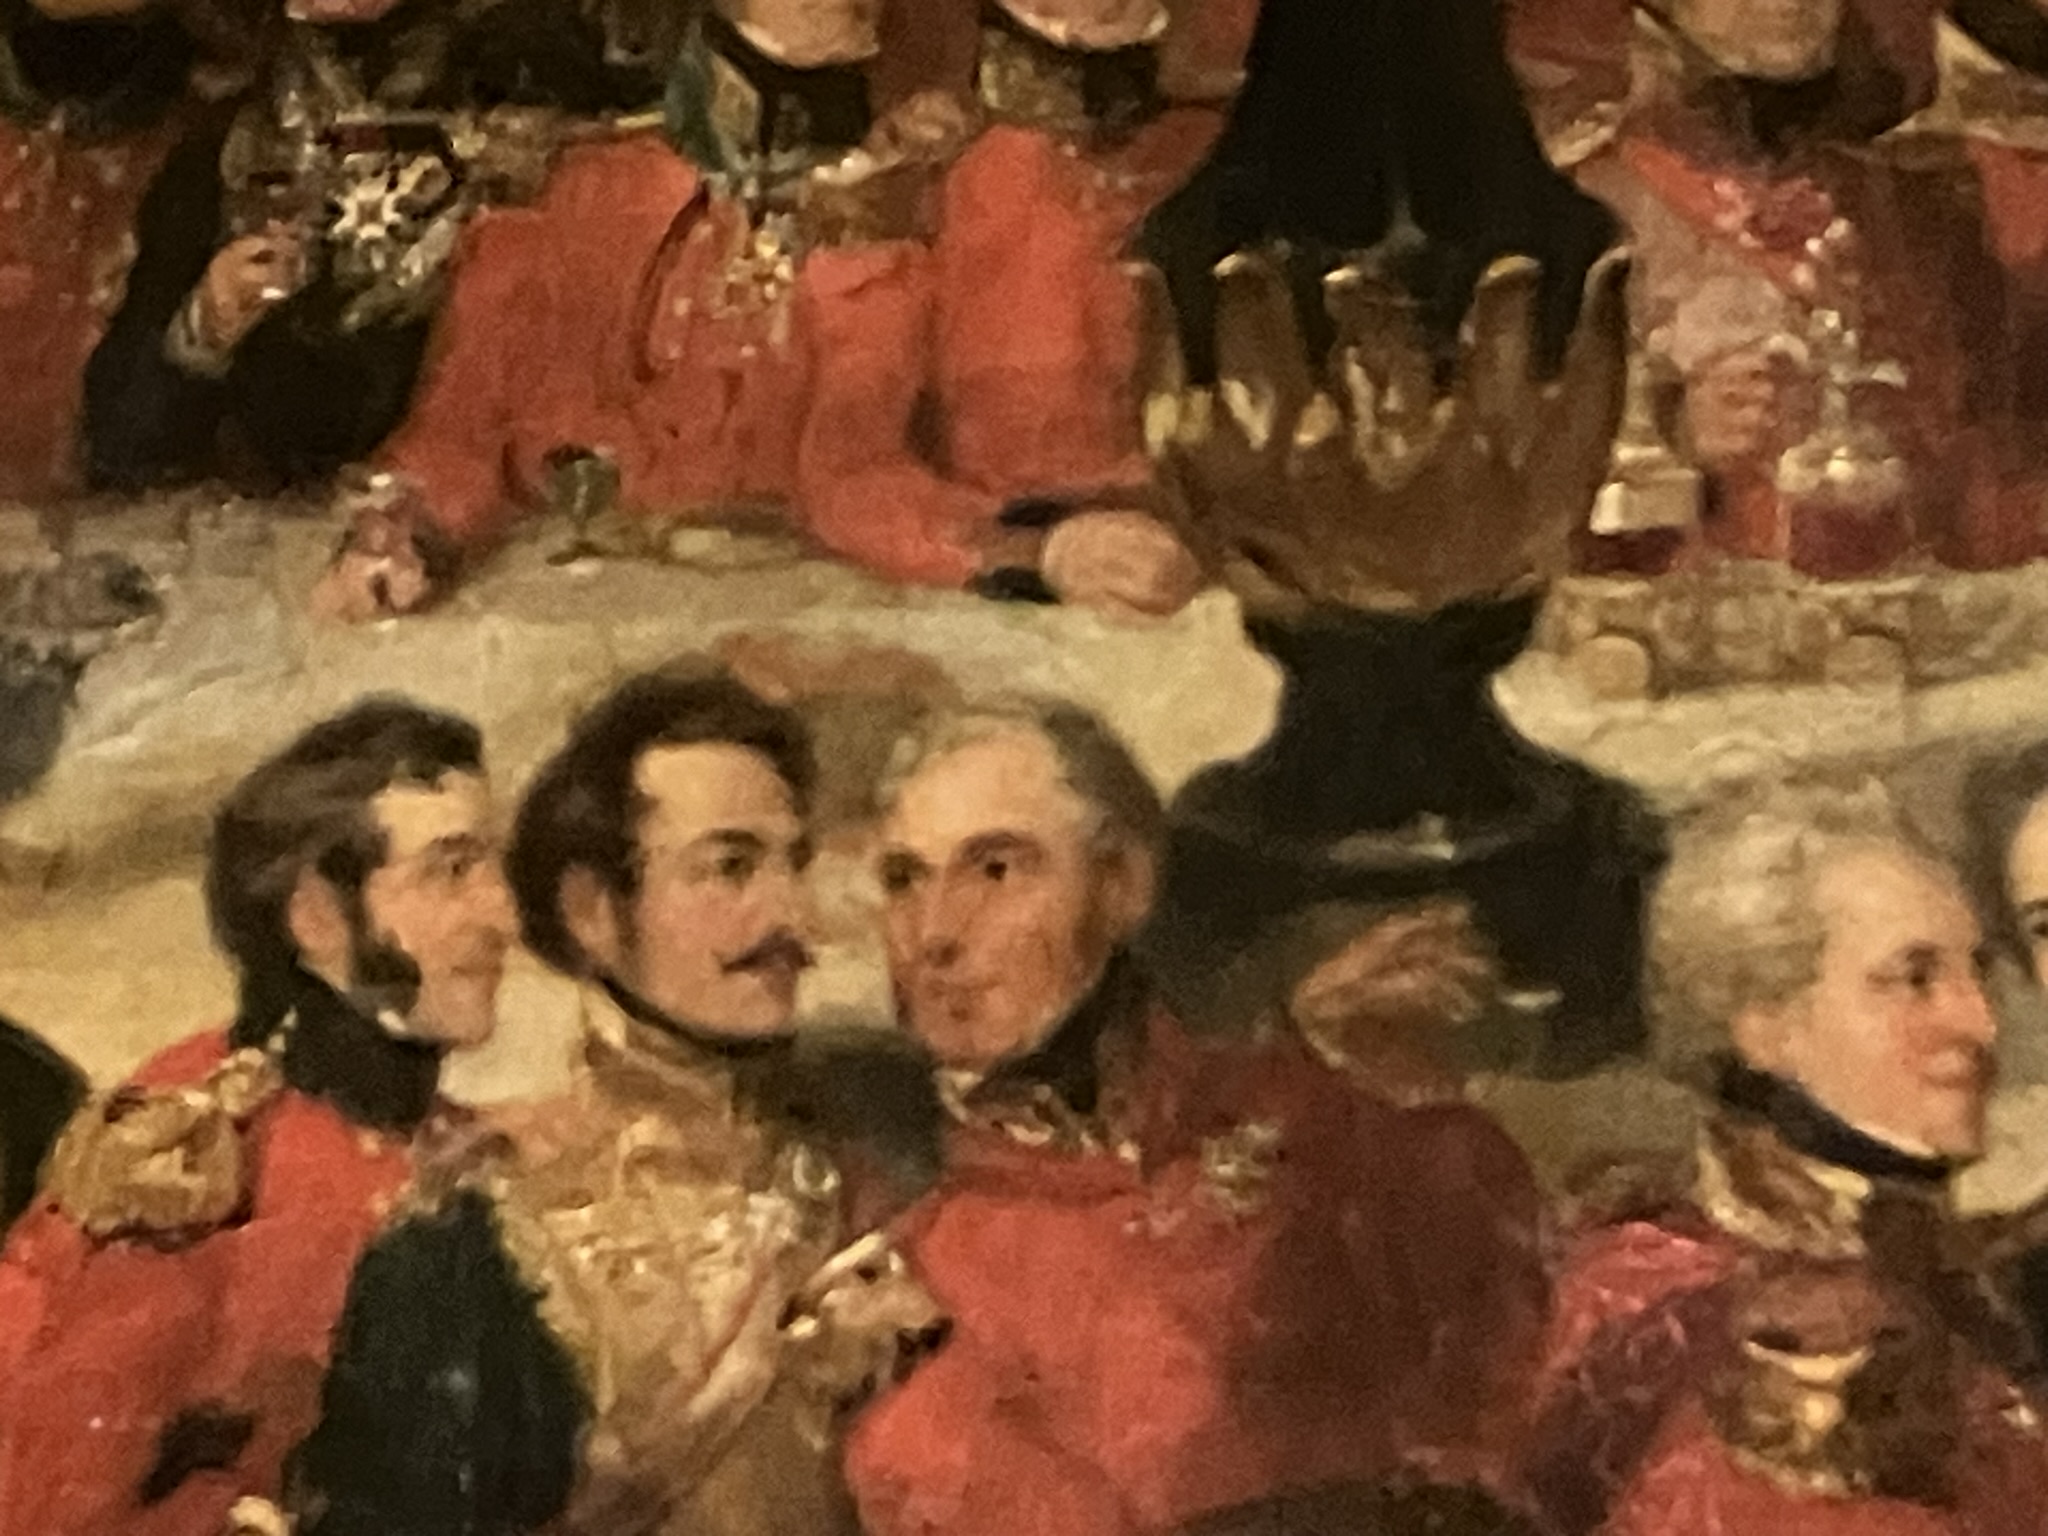 Sir William Elphinstone, centre, in red jacket. Detail of a large painting of state banquet at Apsley House.